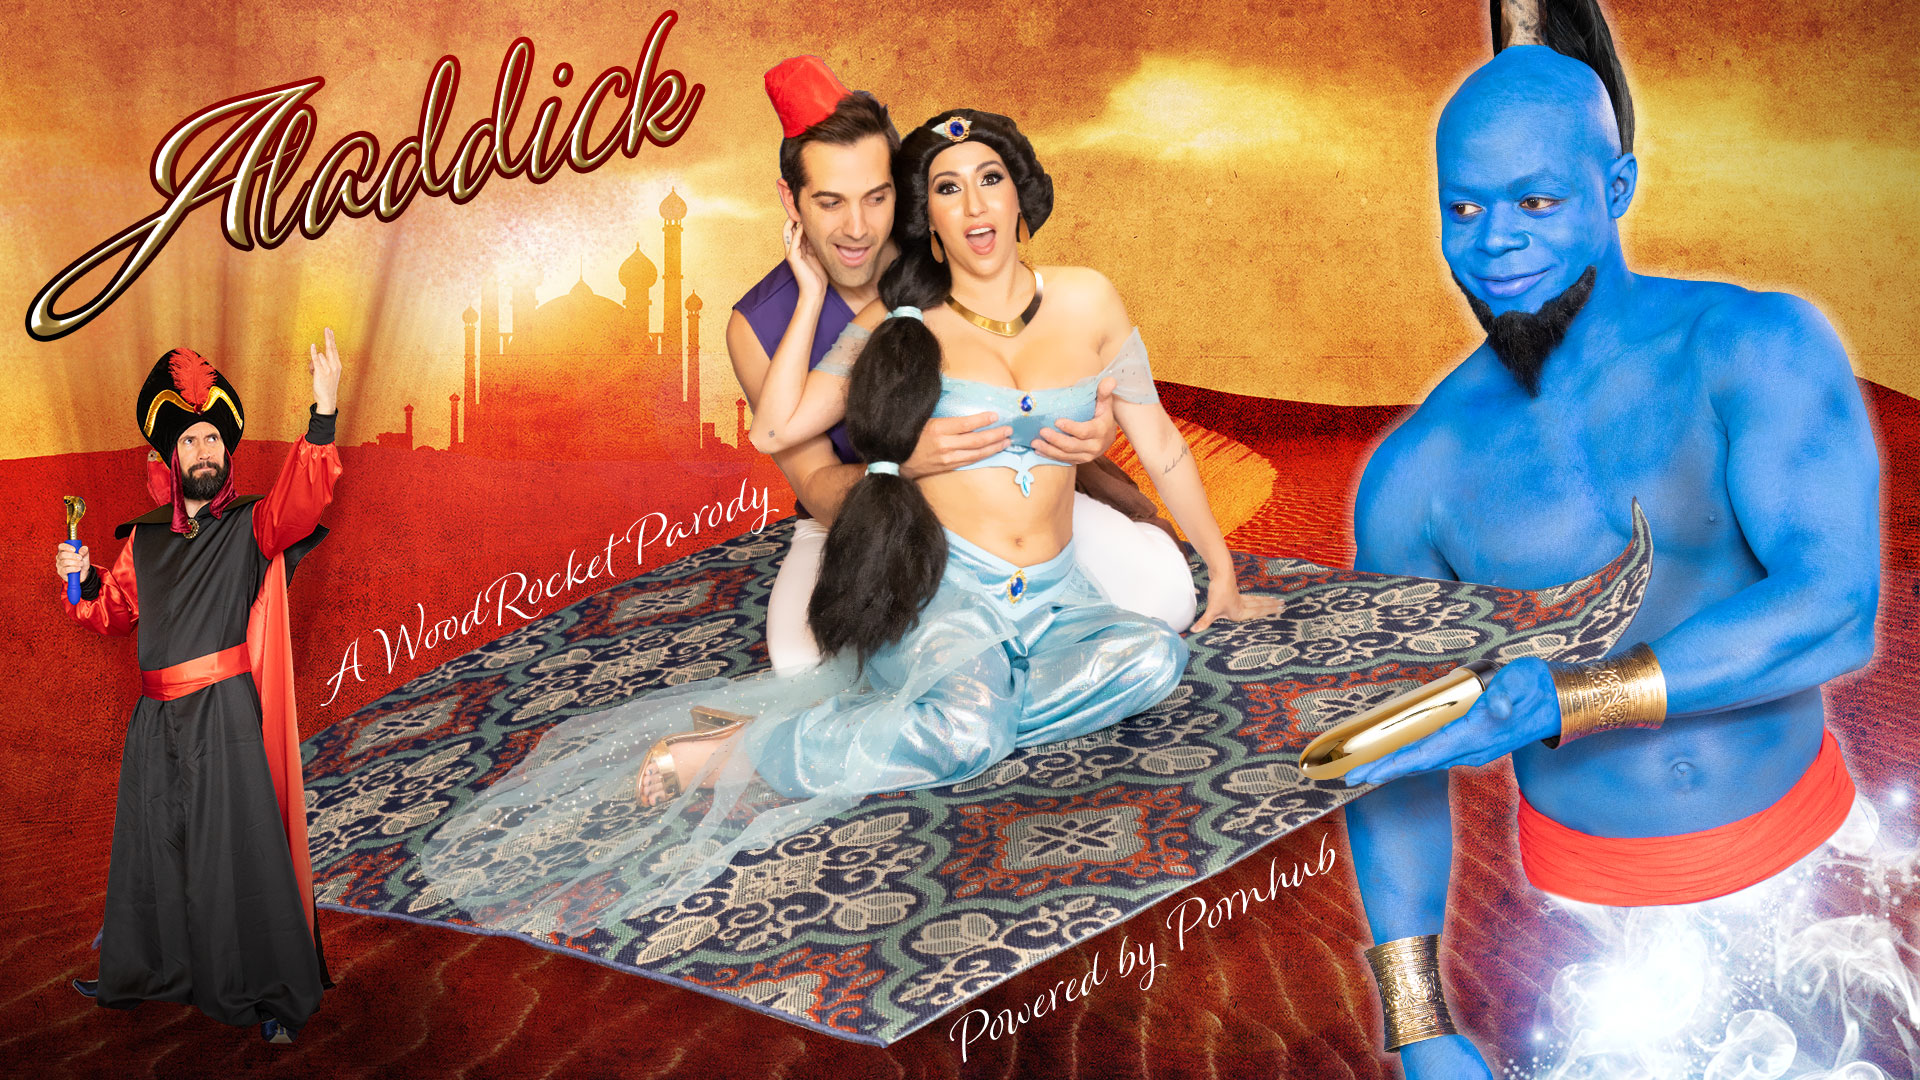 Gr8 B. recommend best of aladdick behind scenes